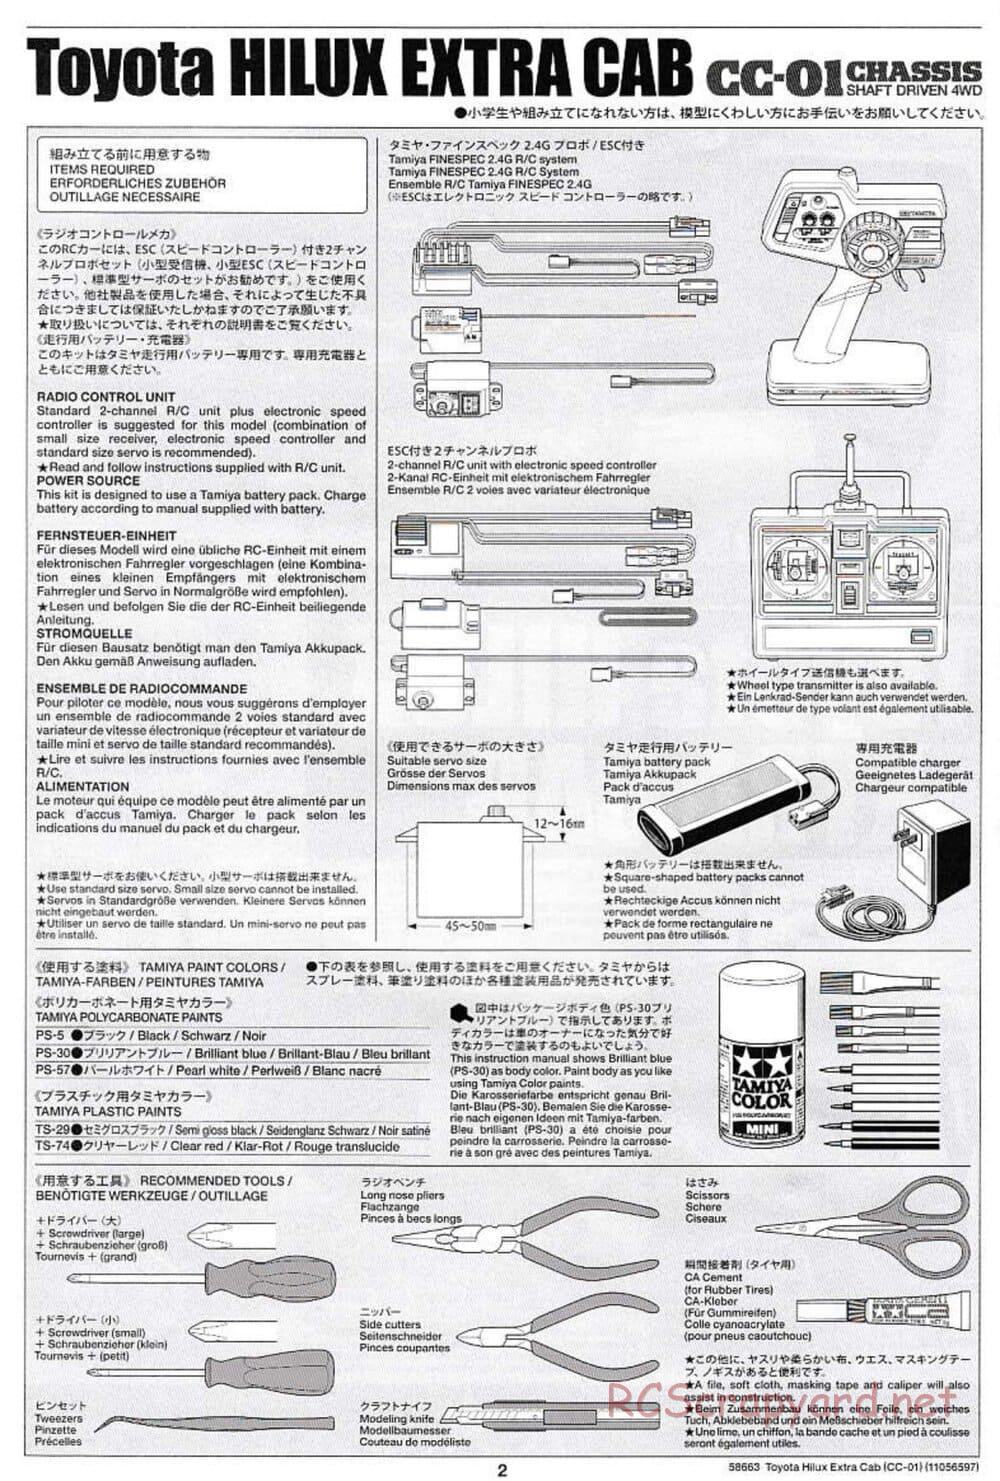 Tamiya - Toyota Hilux Extra Cab - CC-01 Chassis - Manual - Page 2